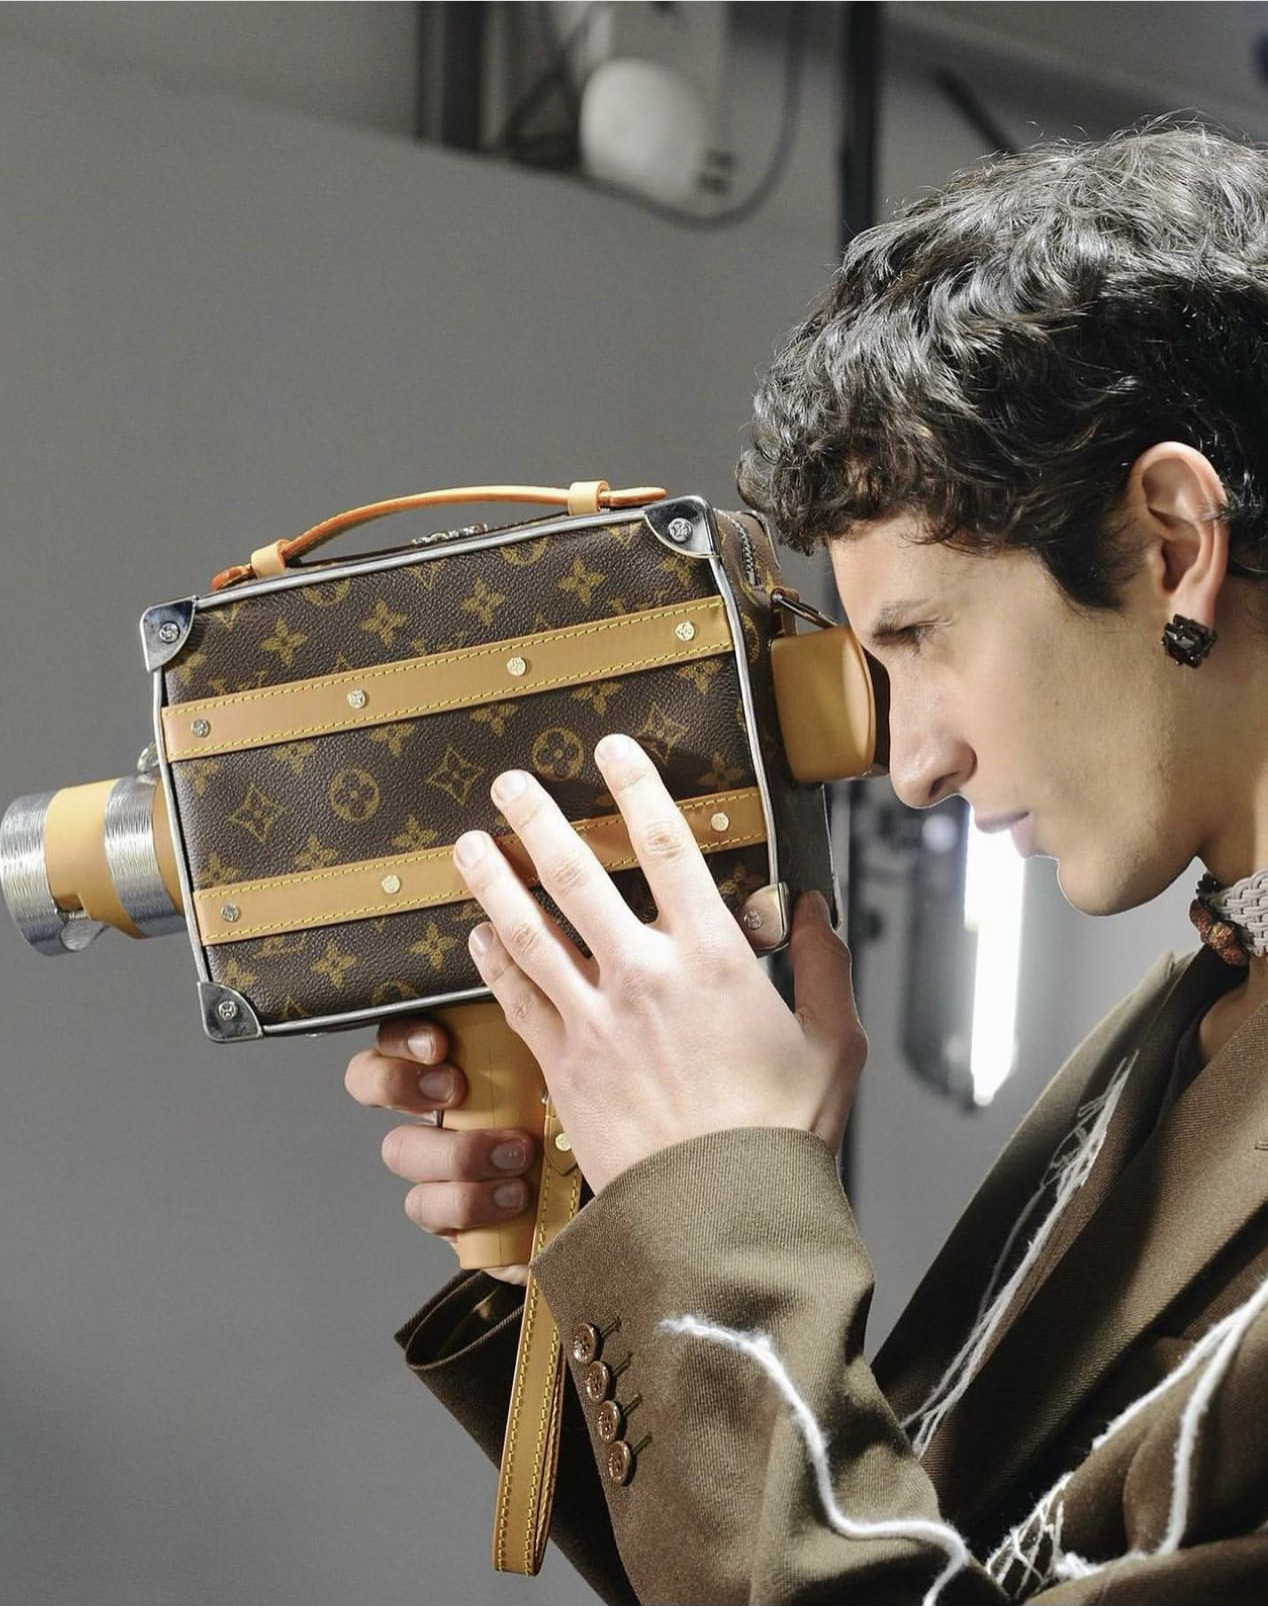 The Louis Vuitton Camera Bag designed by Colm Dillane is indeed a